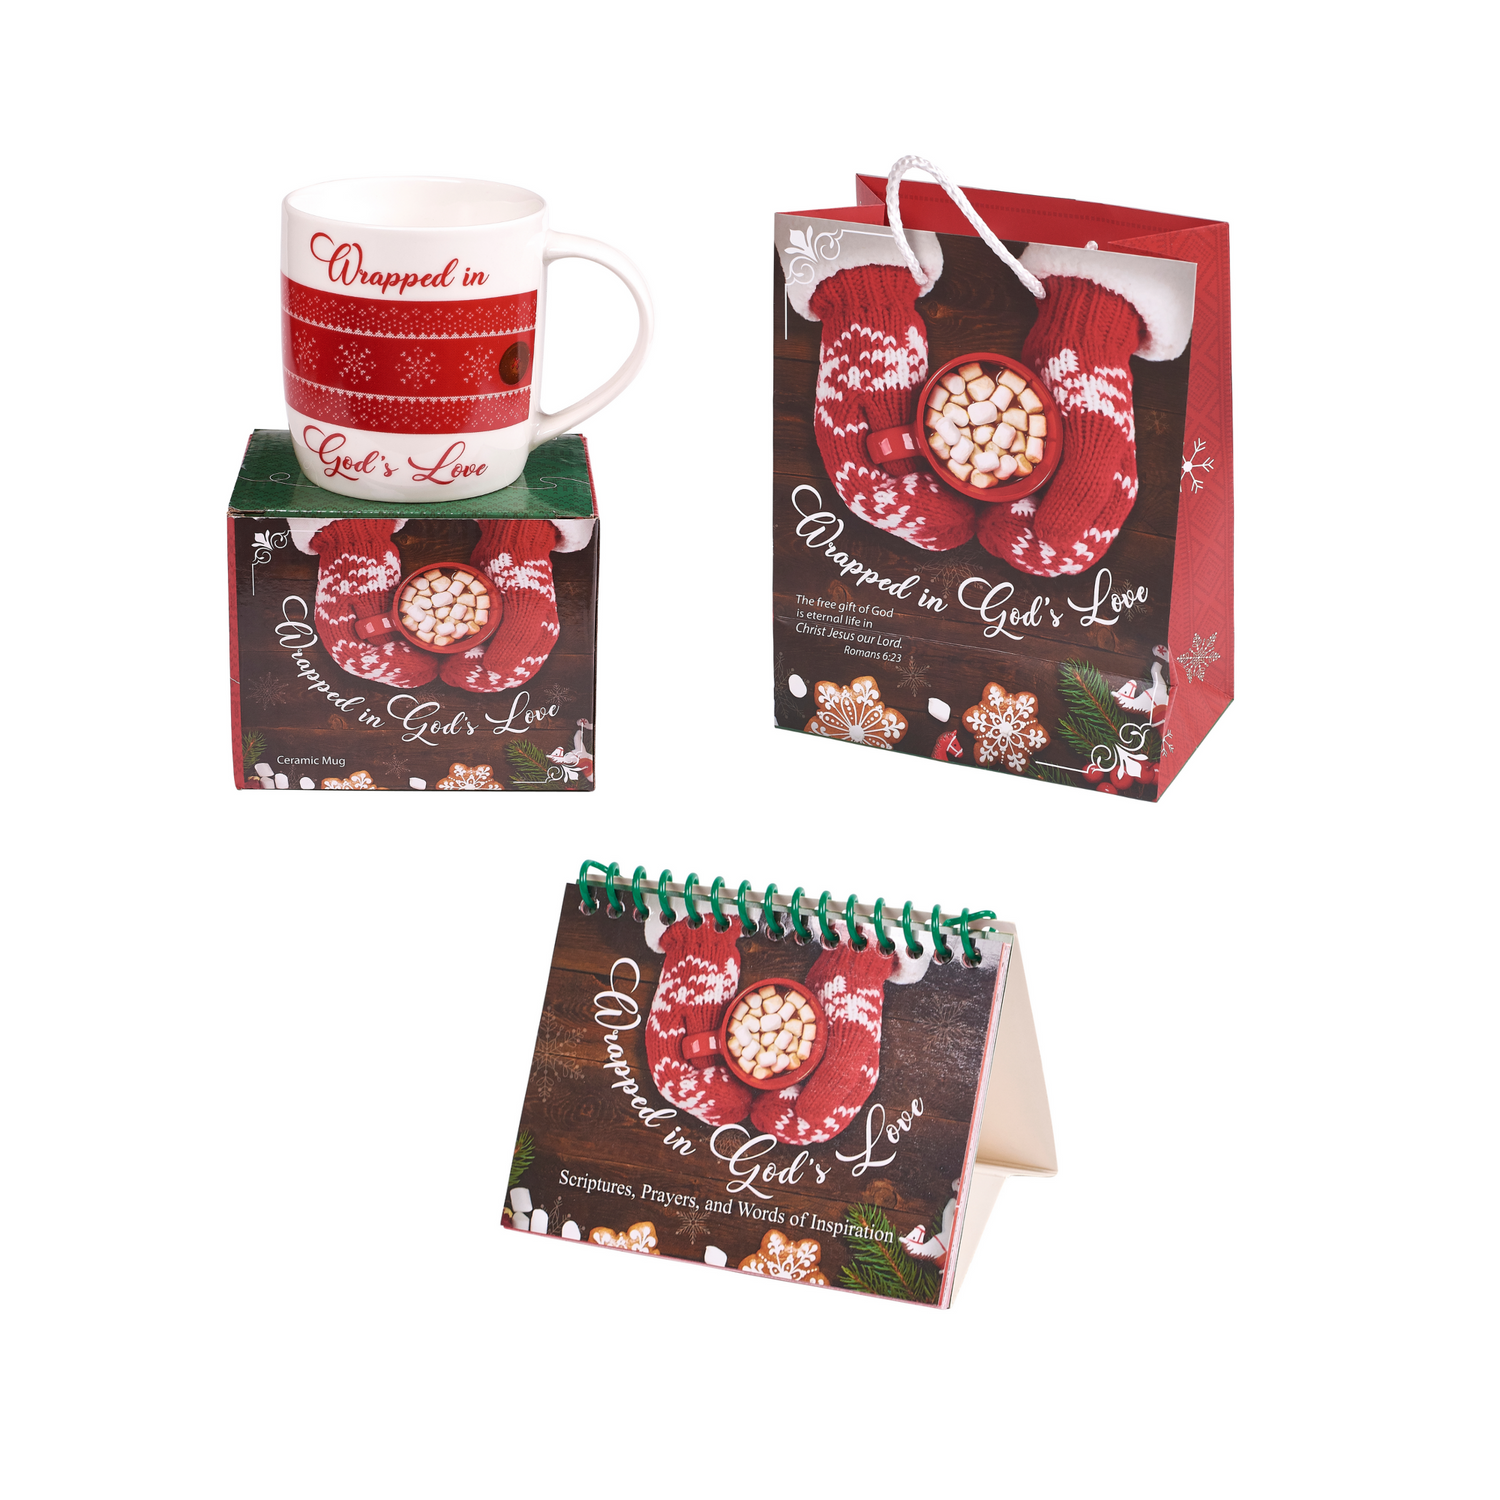 Wrapped in God's Love Small Group Study Set with Mug, Flip Book, Gift Bag